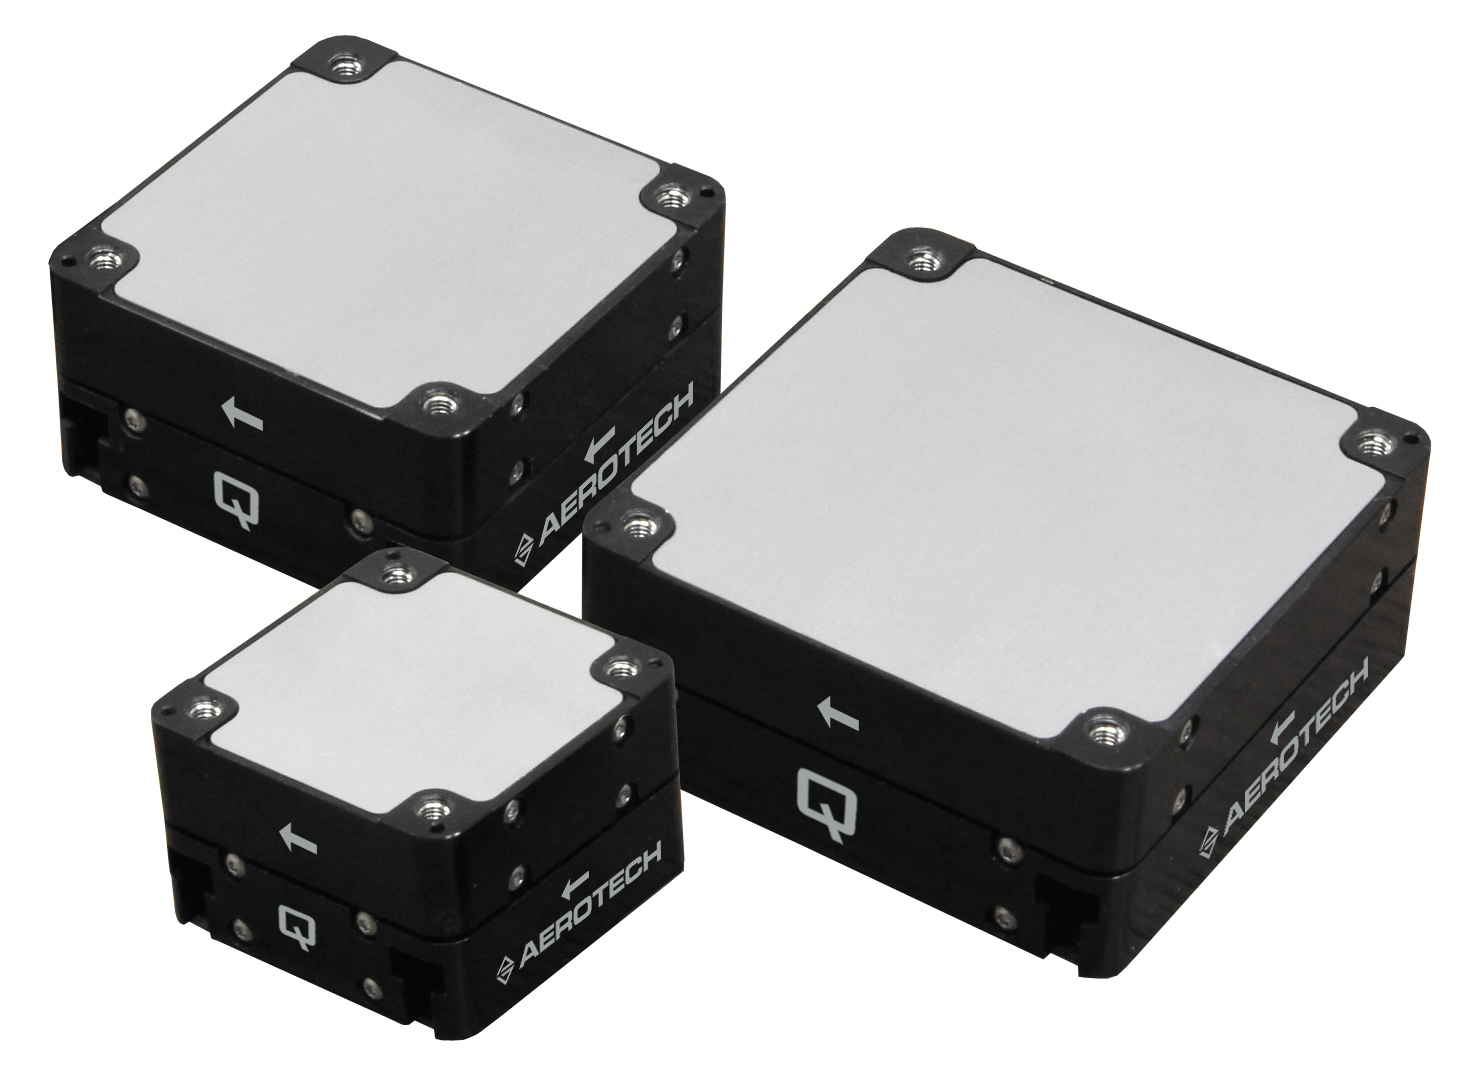 Shown here is an Aerotech QNP-XY series piezo nanopositioning stage with a travel from 100 to 600 μm. It has higher dynamics (resonant frequency and stiffness) than stages comparable in size and travel.